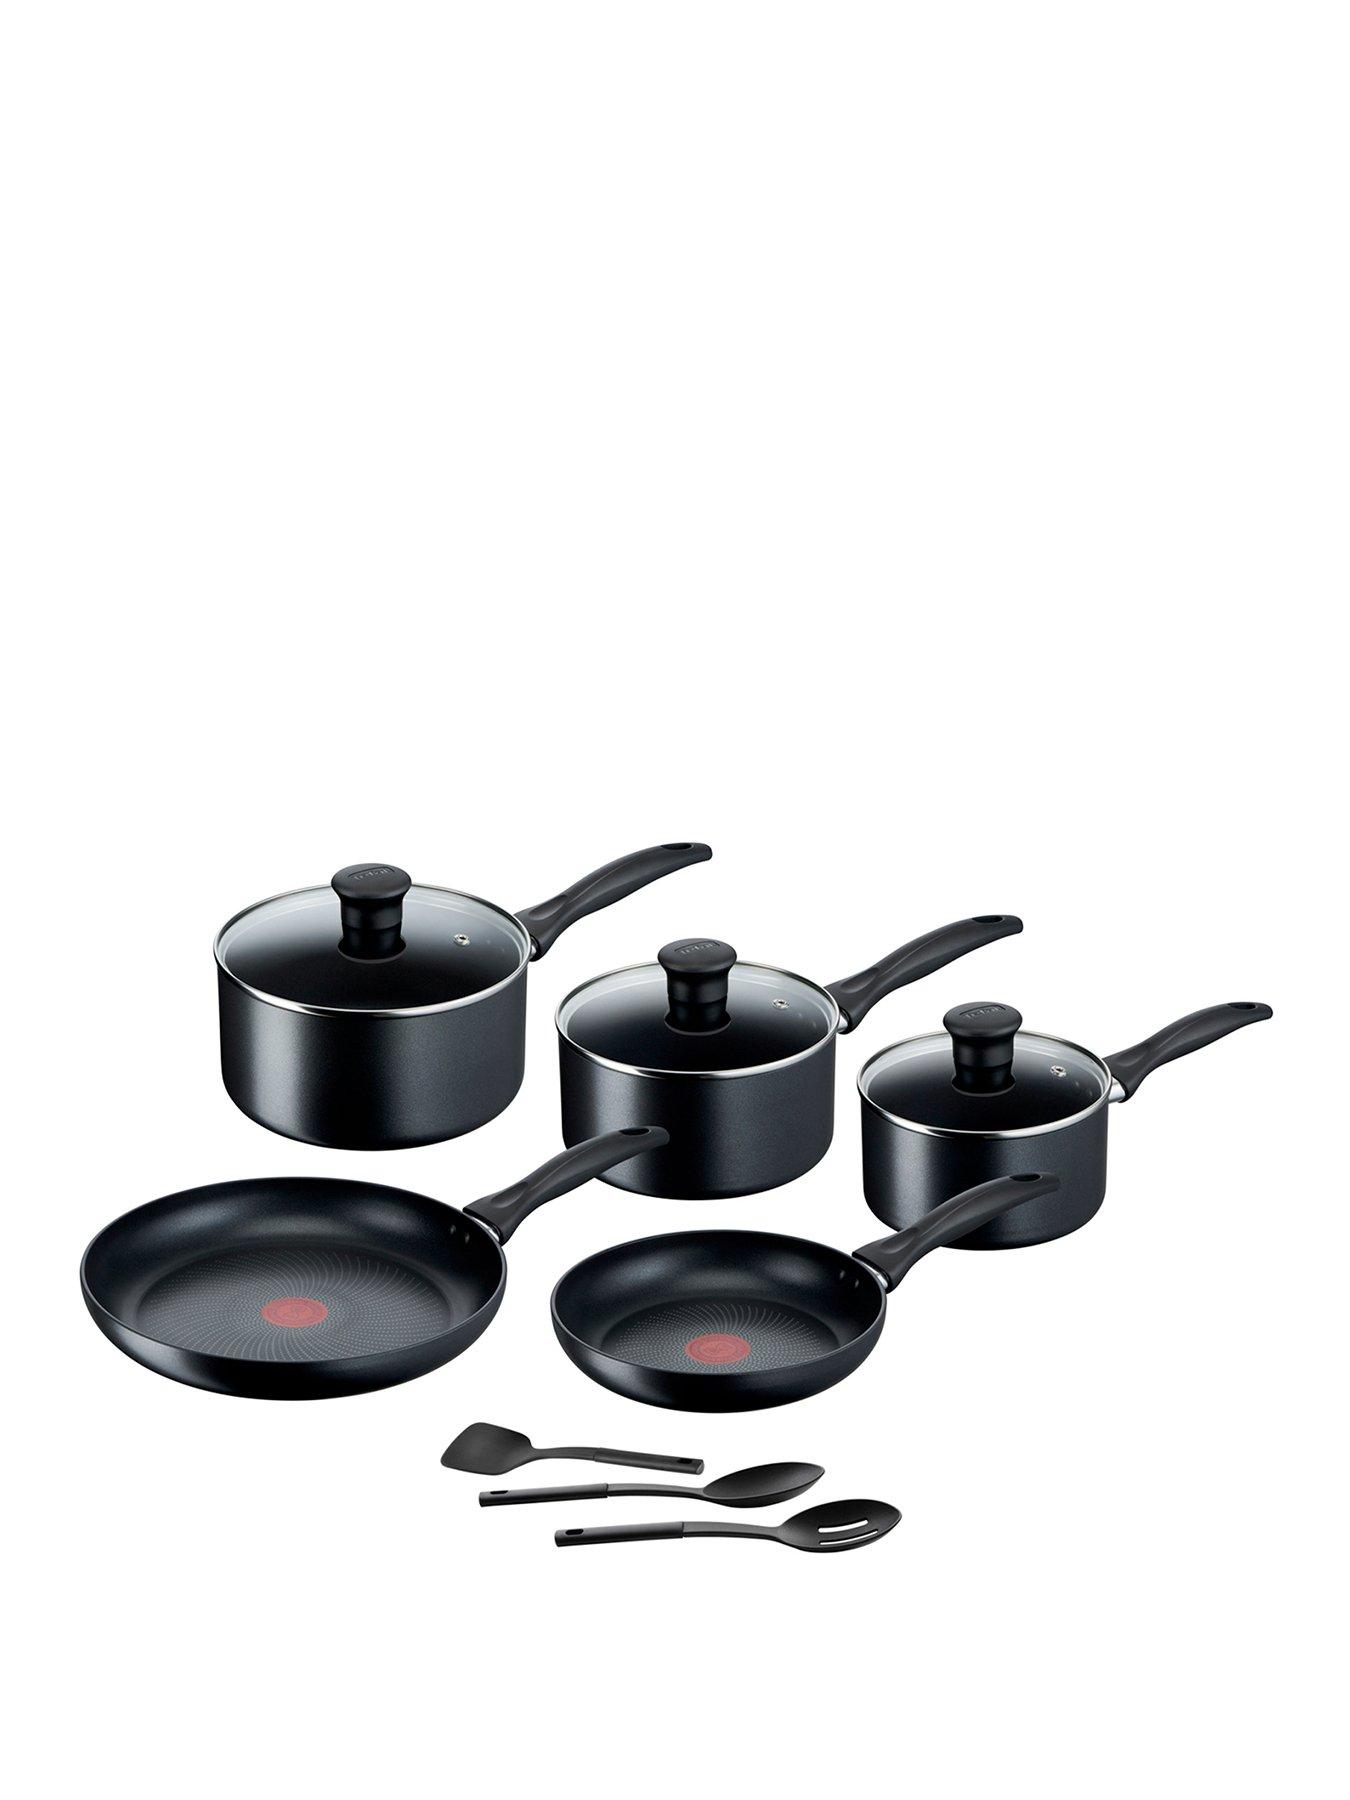 Tefal Induction Cookware